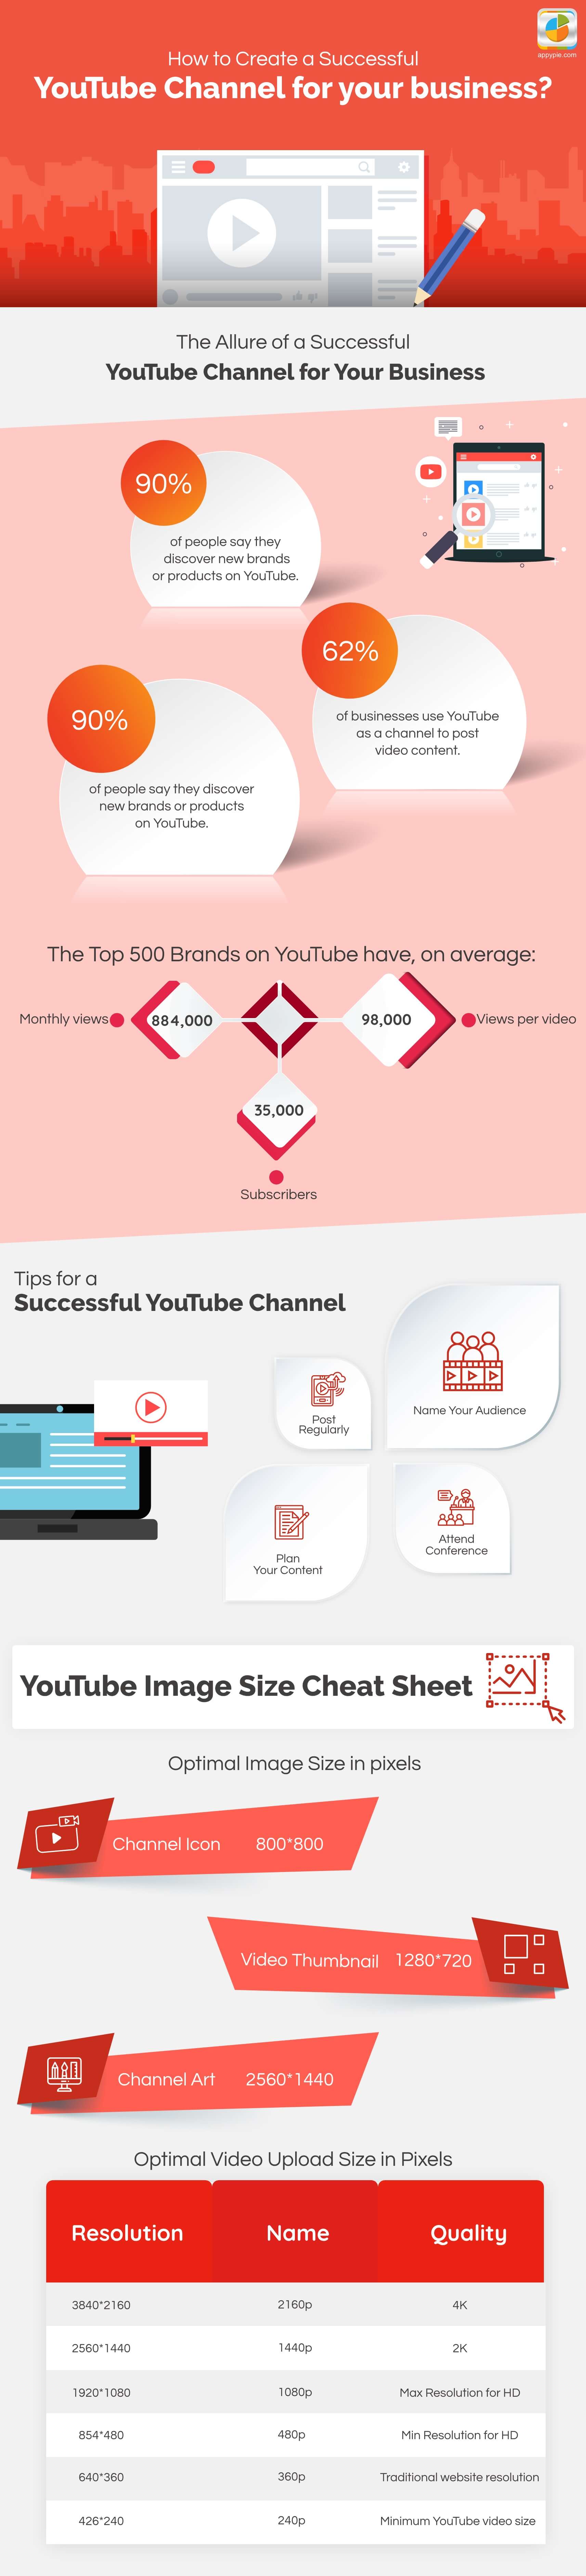 YouTube Channel Design How to Design YouTube Channel Page